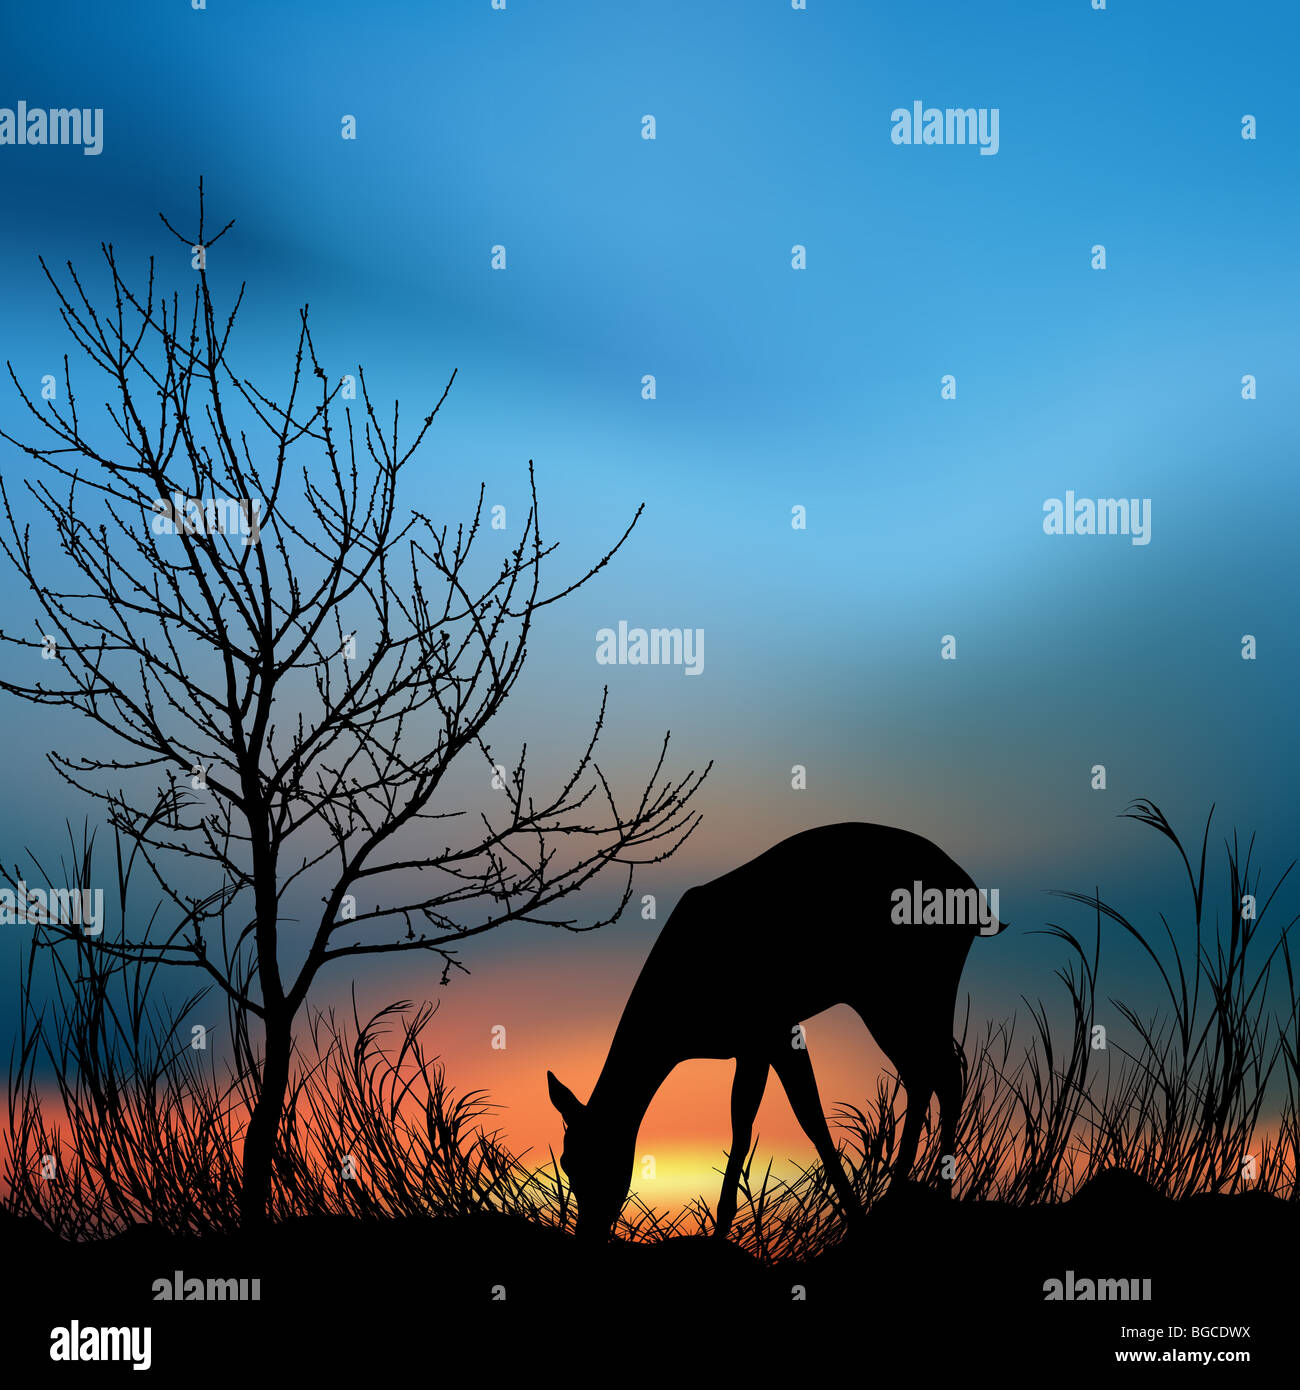 silhouette view of a deer eating grass Stock Photo